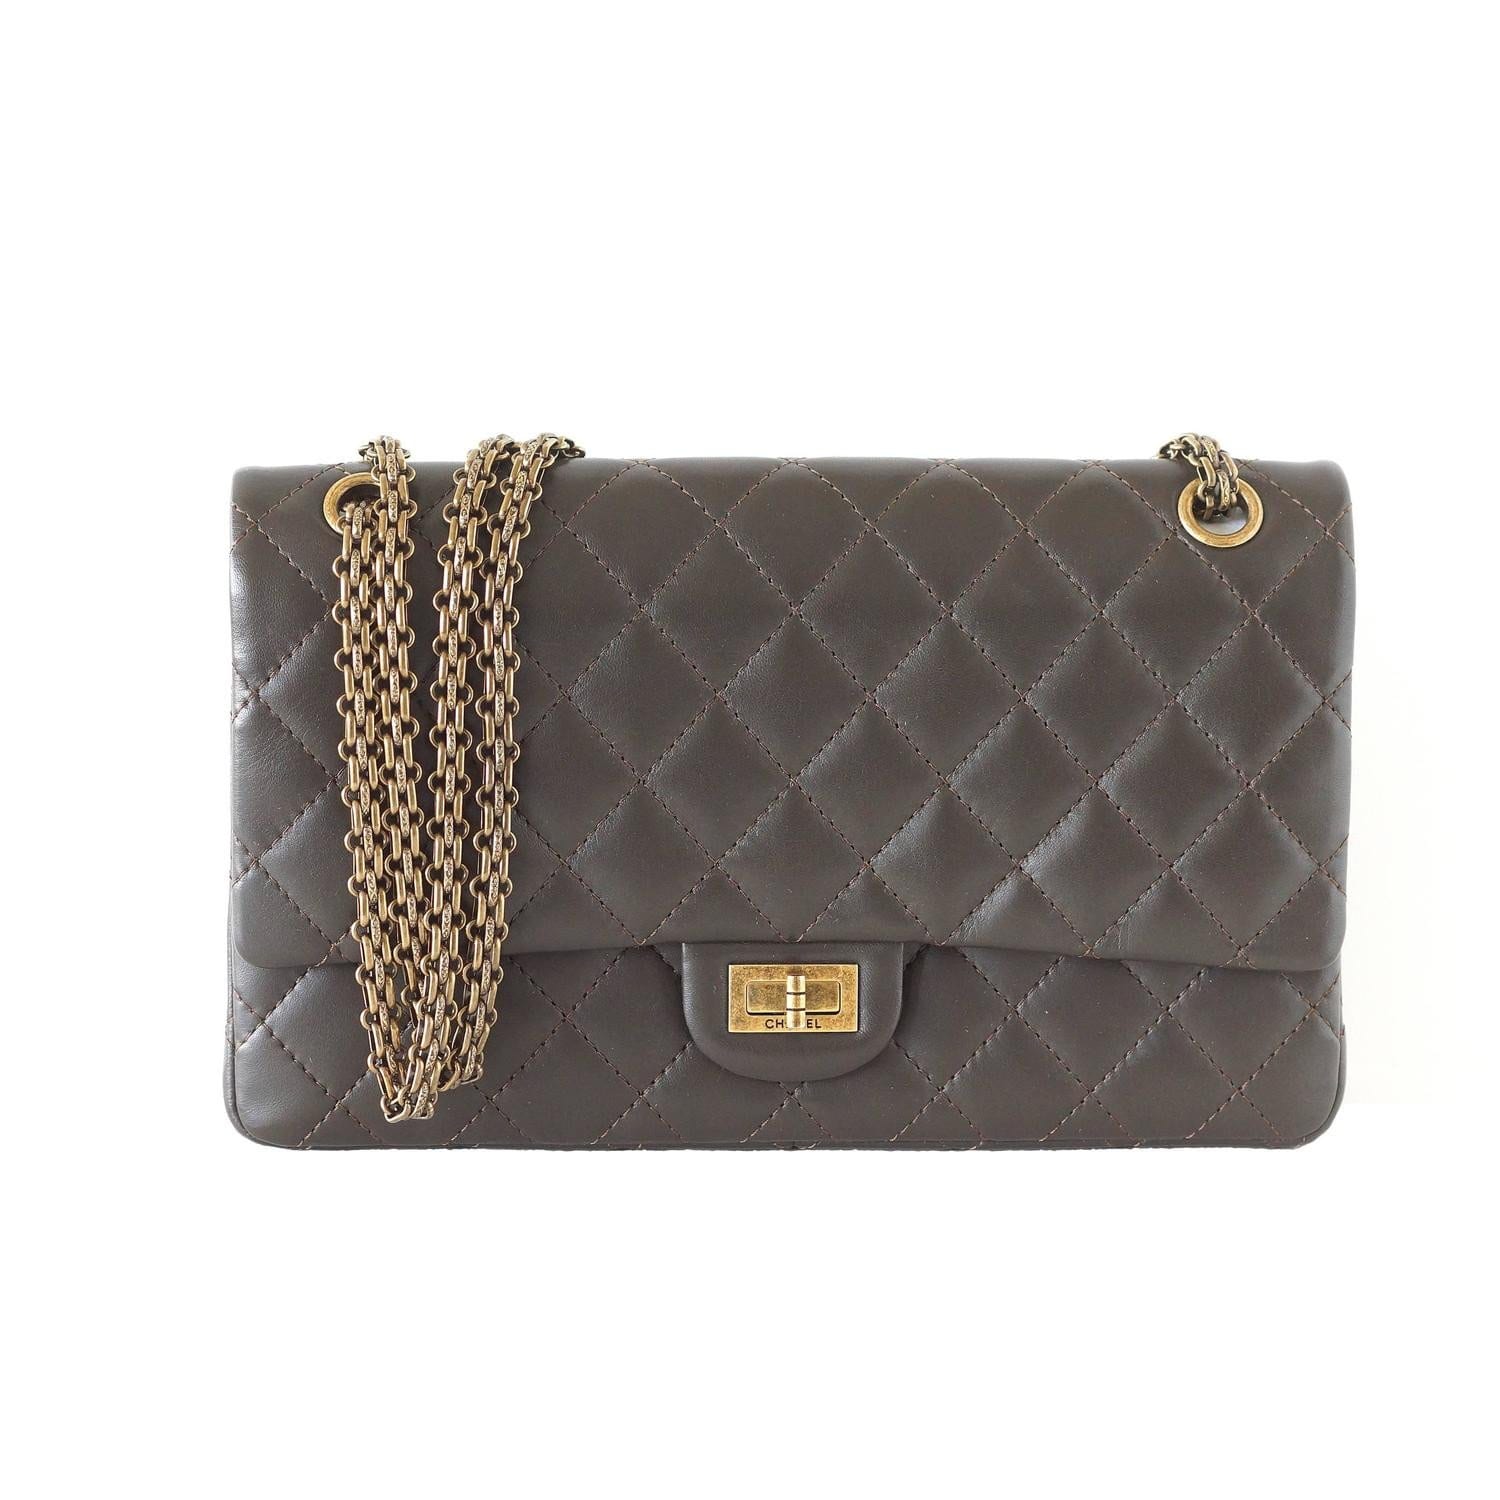 CHANEL CHANEL Classic Flap Bags & Handbags for Women, Authenticity  Guaranteed